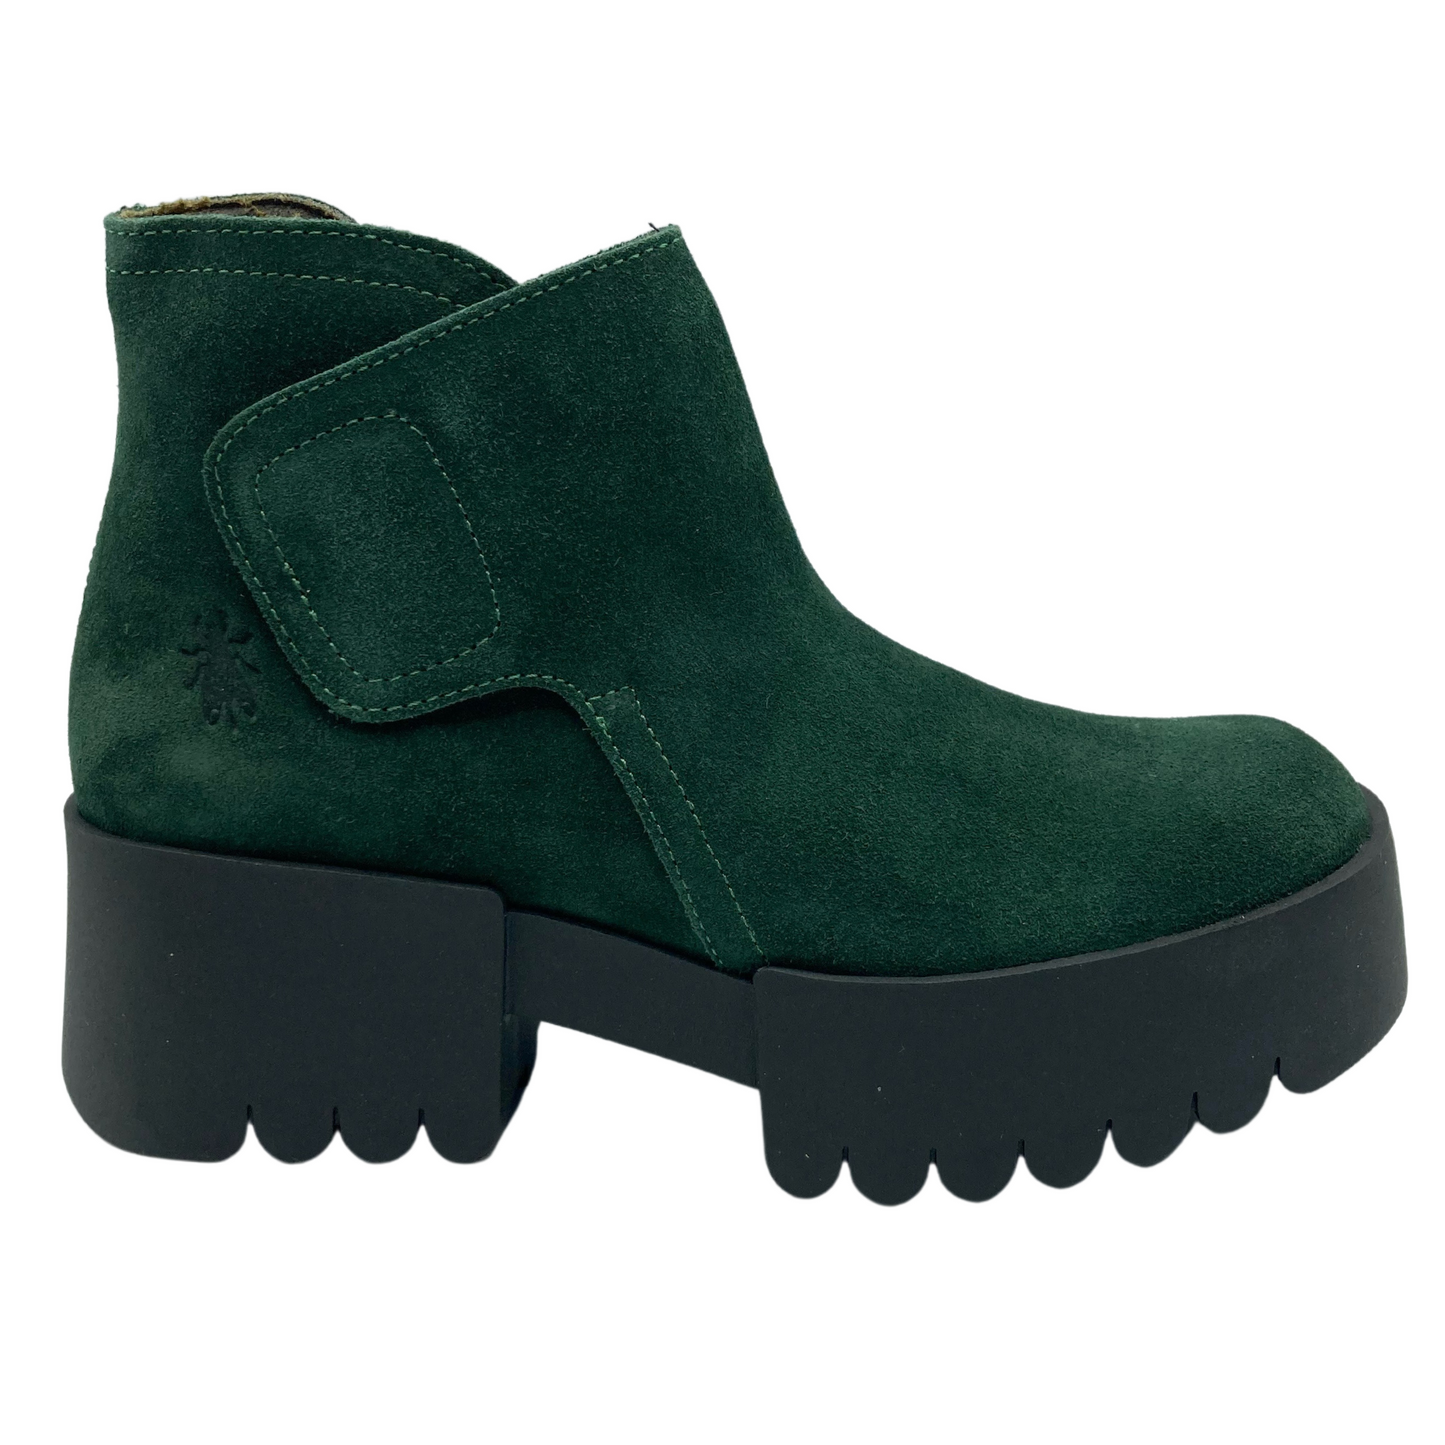 Right facing view of green suede ankle boot with velcro closure and chunky black cleated heel